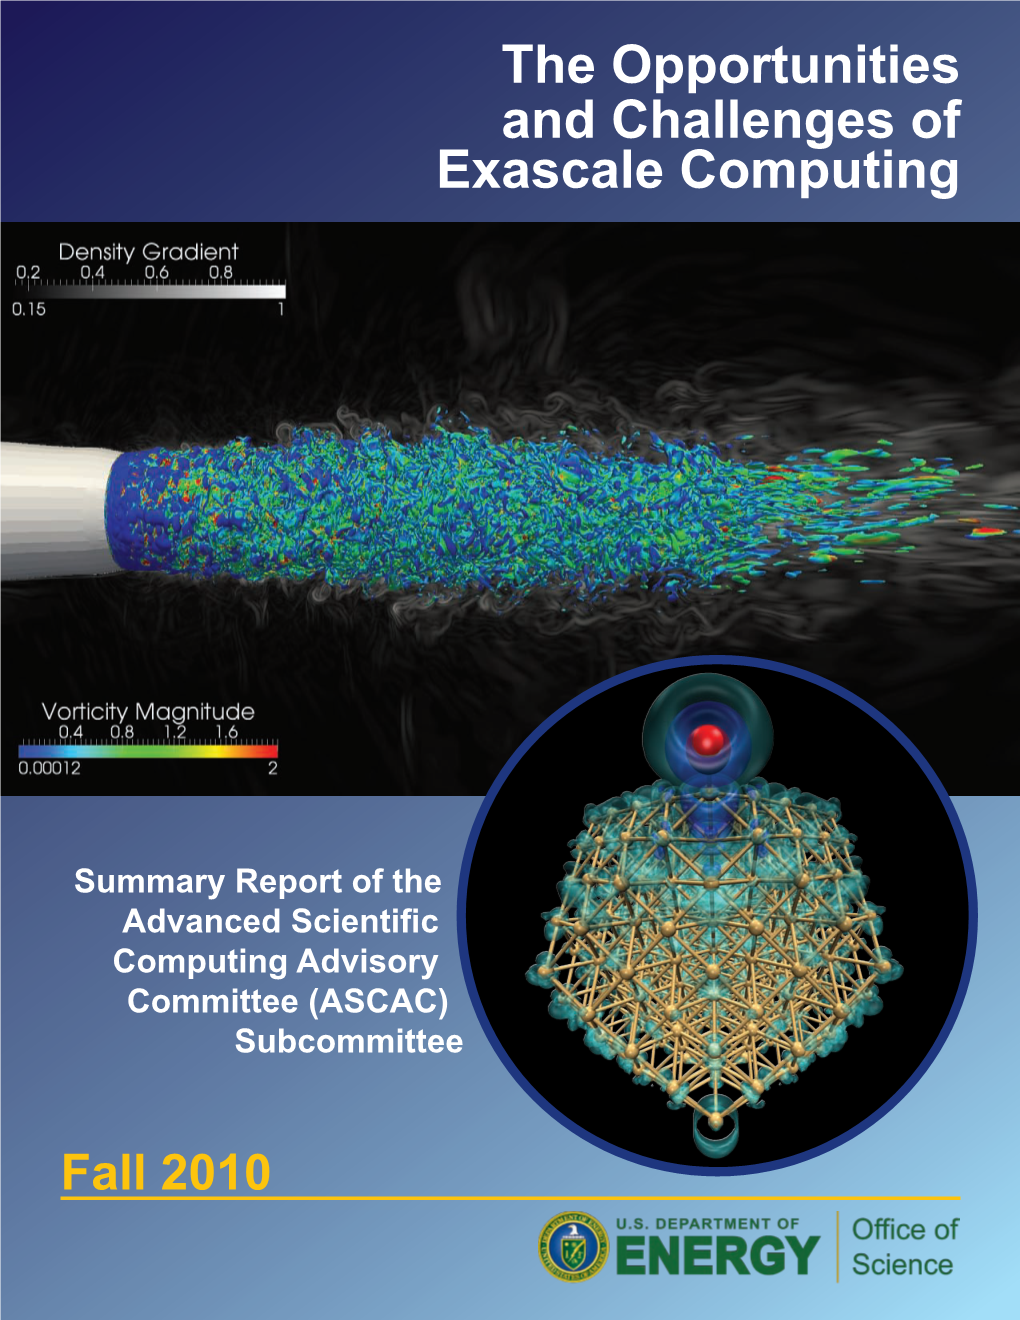 The Opportunities and Challenges of Exascale Computing